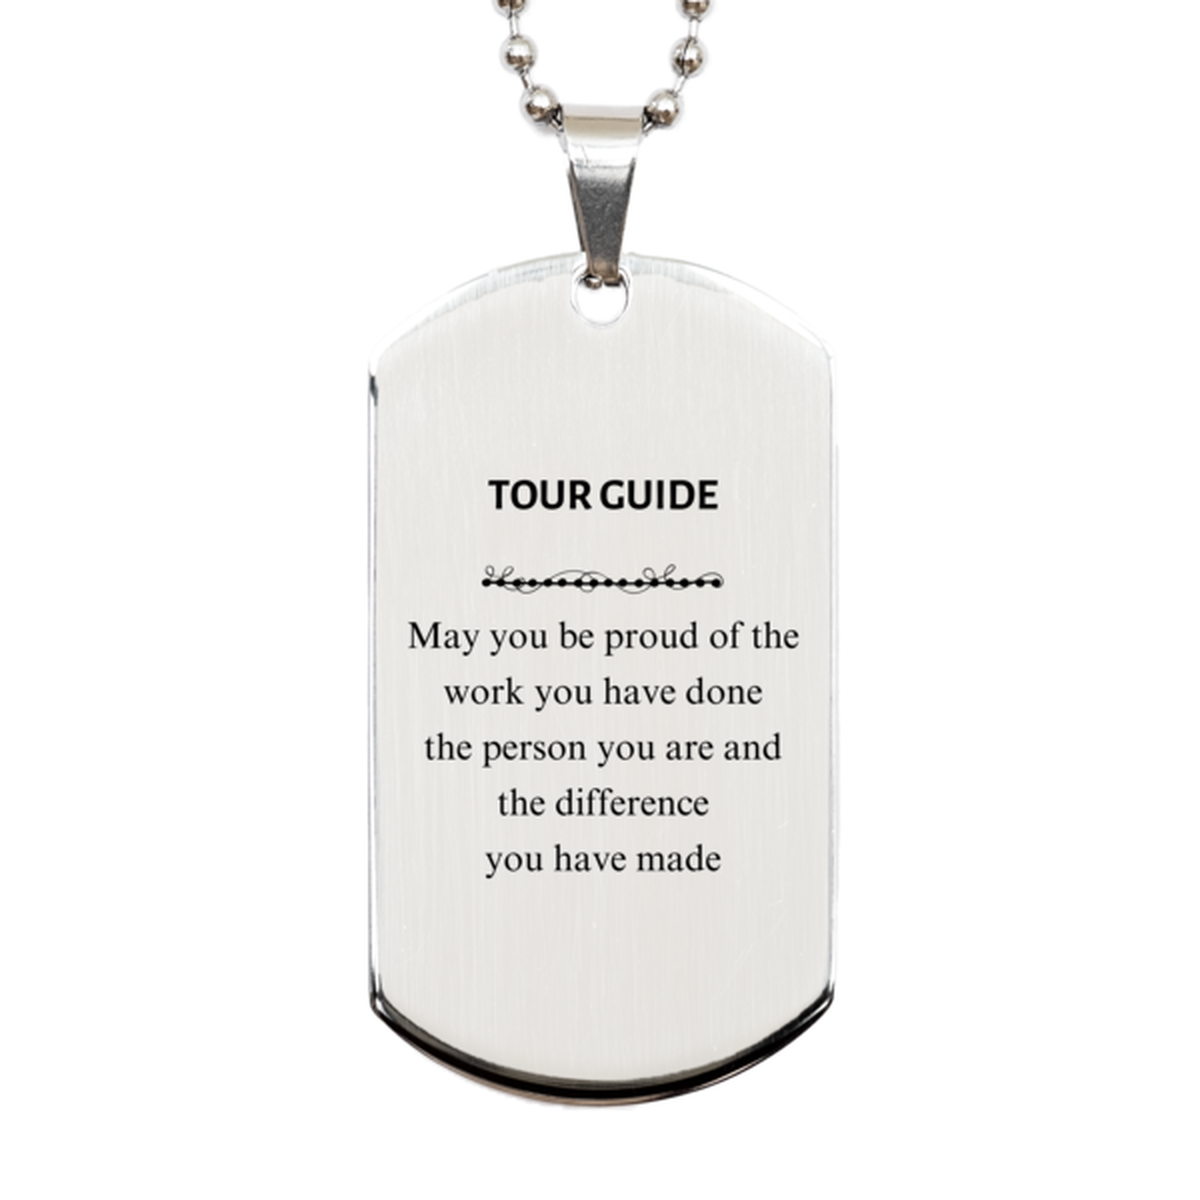 Tour Guide May you be proud of the work you have done, Retirement Tour Guide Silver Dog Tag for Colleague Appreciation Gifts Amazing for Tour Guide